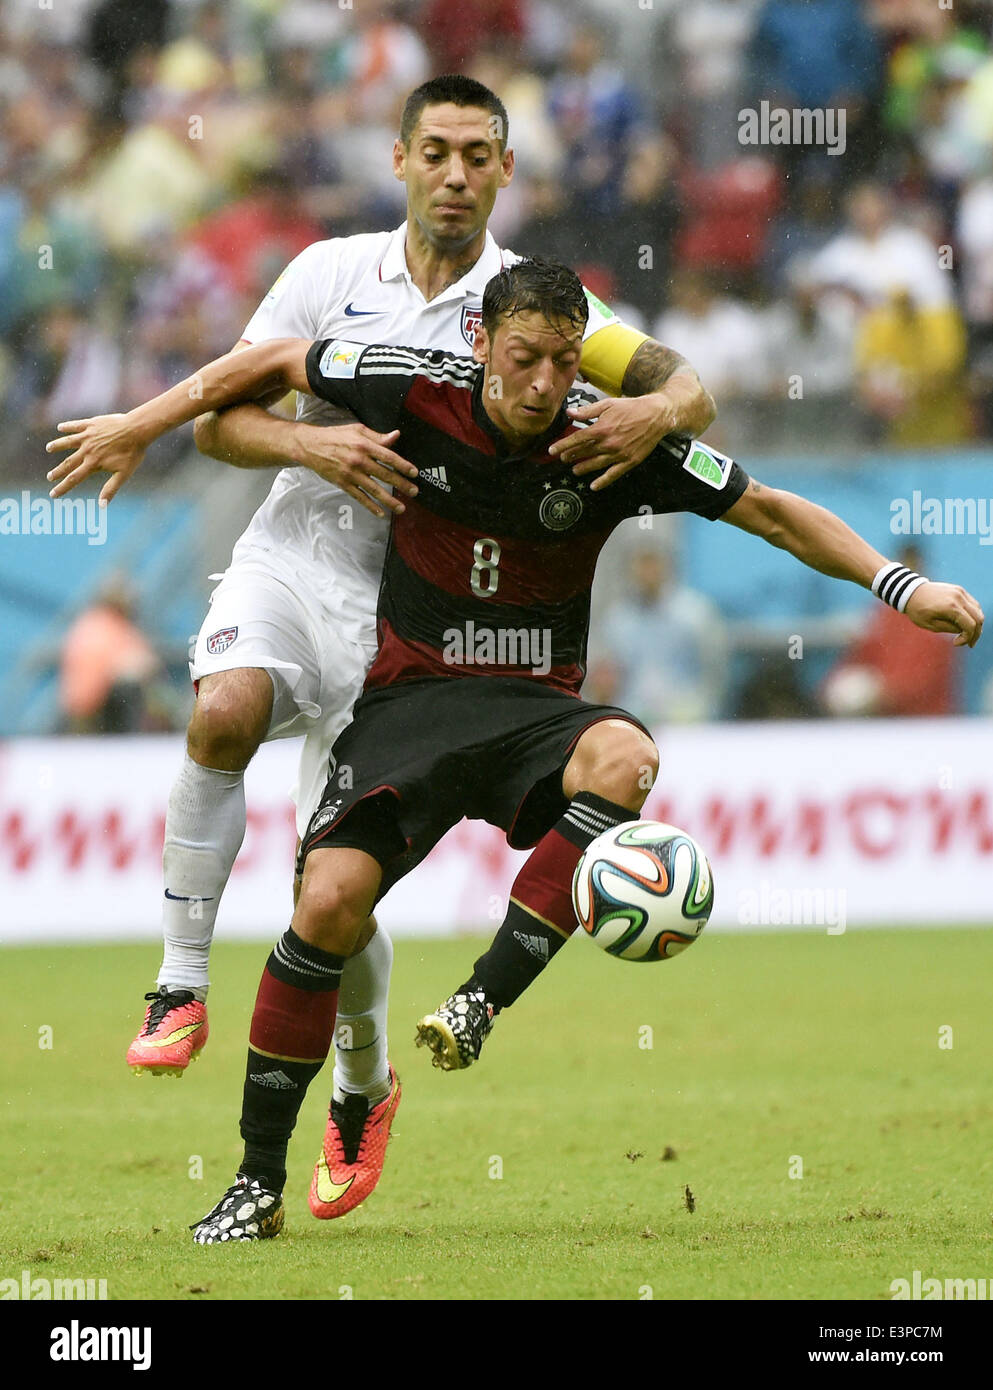 Recife, Brazil. 26th June, 2014. Clint Dempsey of the U.S. (L) vies with Germany's Mesut Ozil during a Group G match between the U.S. and Germany of 2014 FIFA World Cup at the Arena Pernambuco Stadium in Recife, Brazil, on June 26, 2014. Credit:  Lui Siu Wai/Xinhua/Alamy Live News Stock Photo